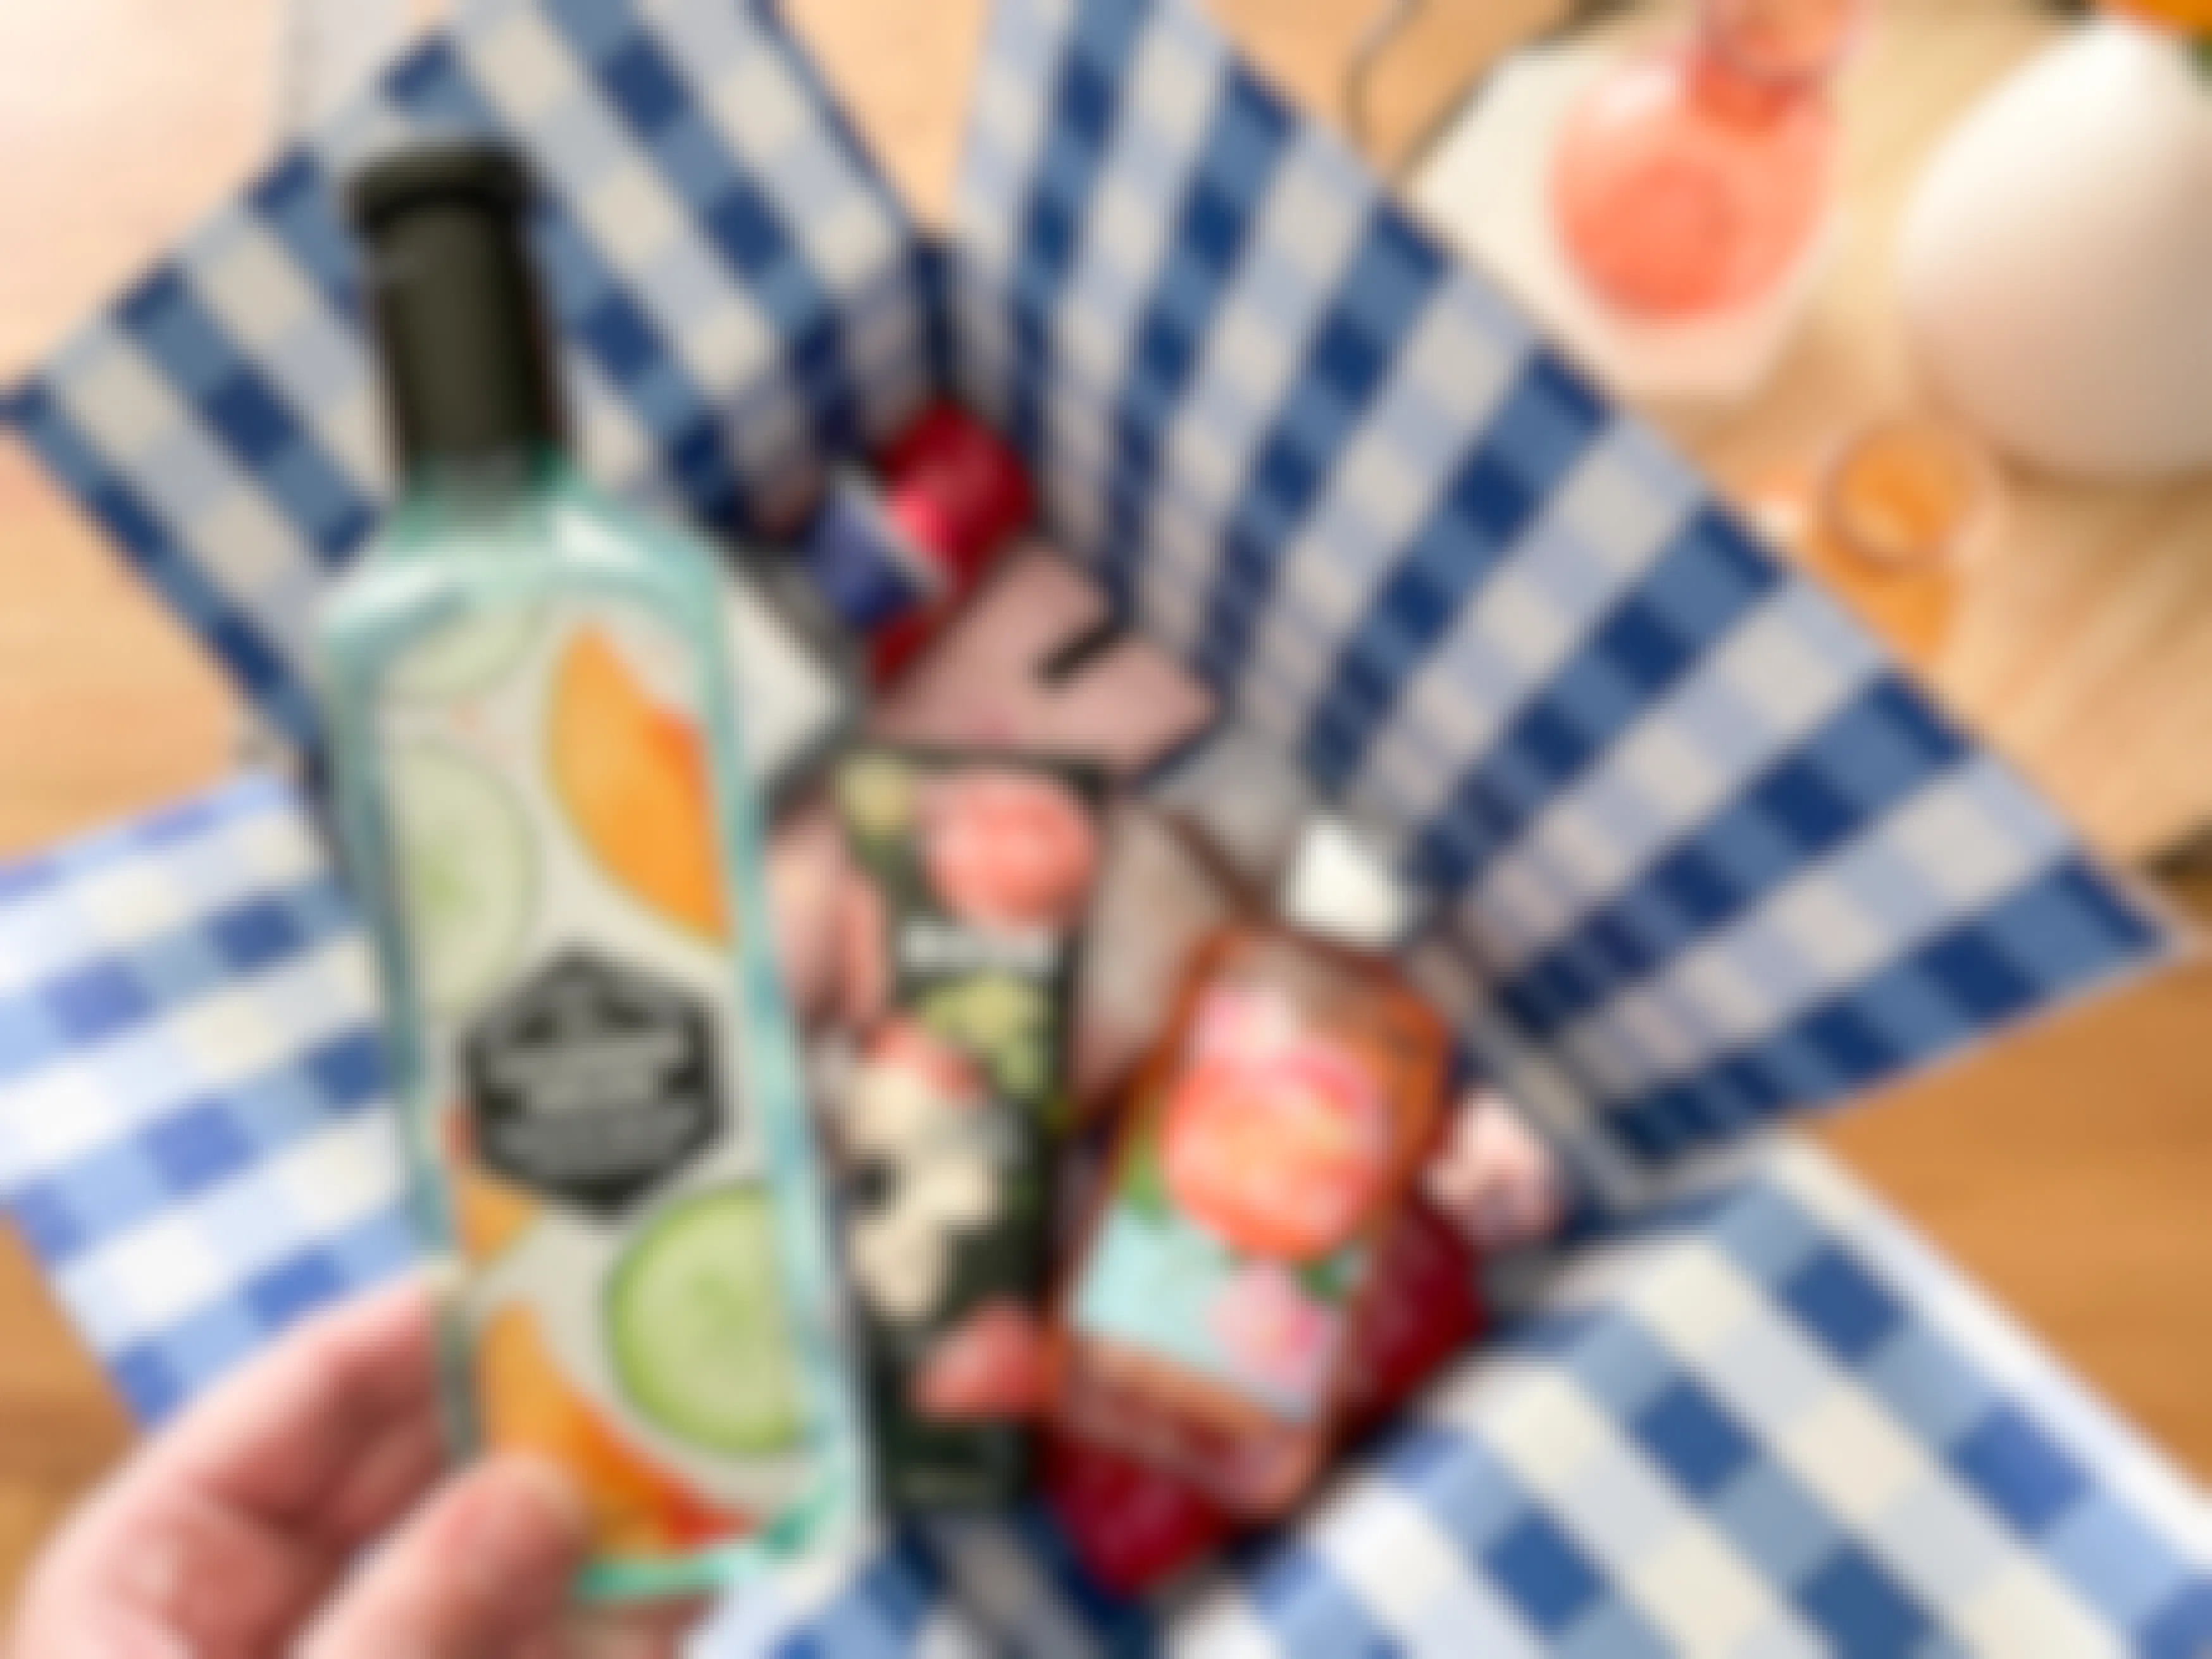 A Bath & body works online order box filled with products is open on a table. A person holds a bottle of Cucumber Melon hand soap next to the box, having just taken it out.